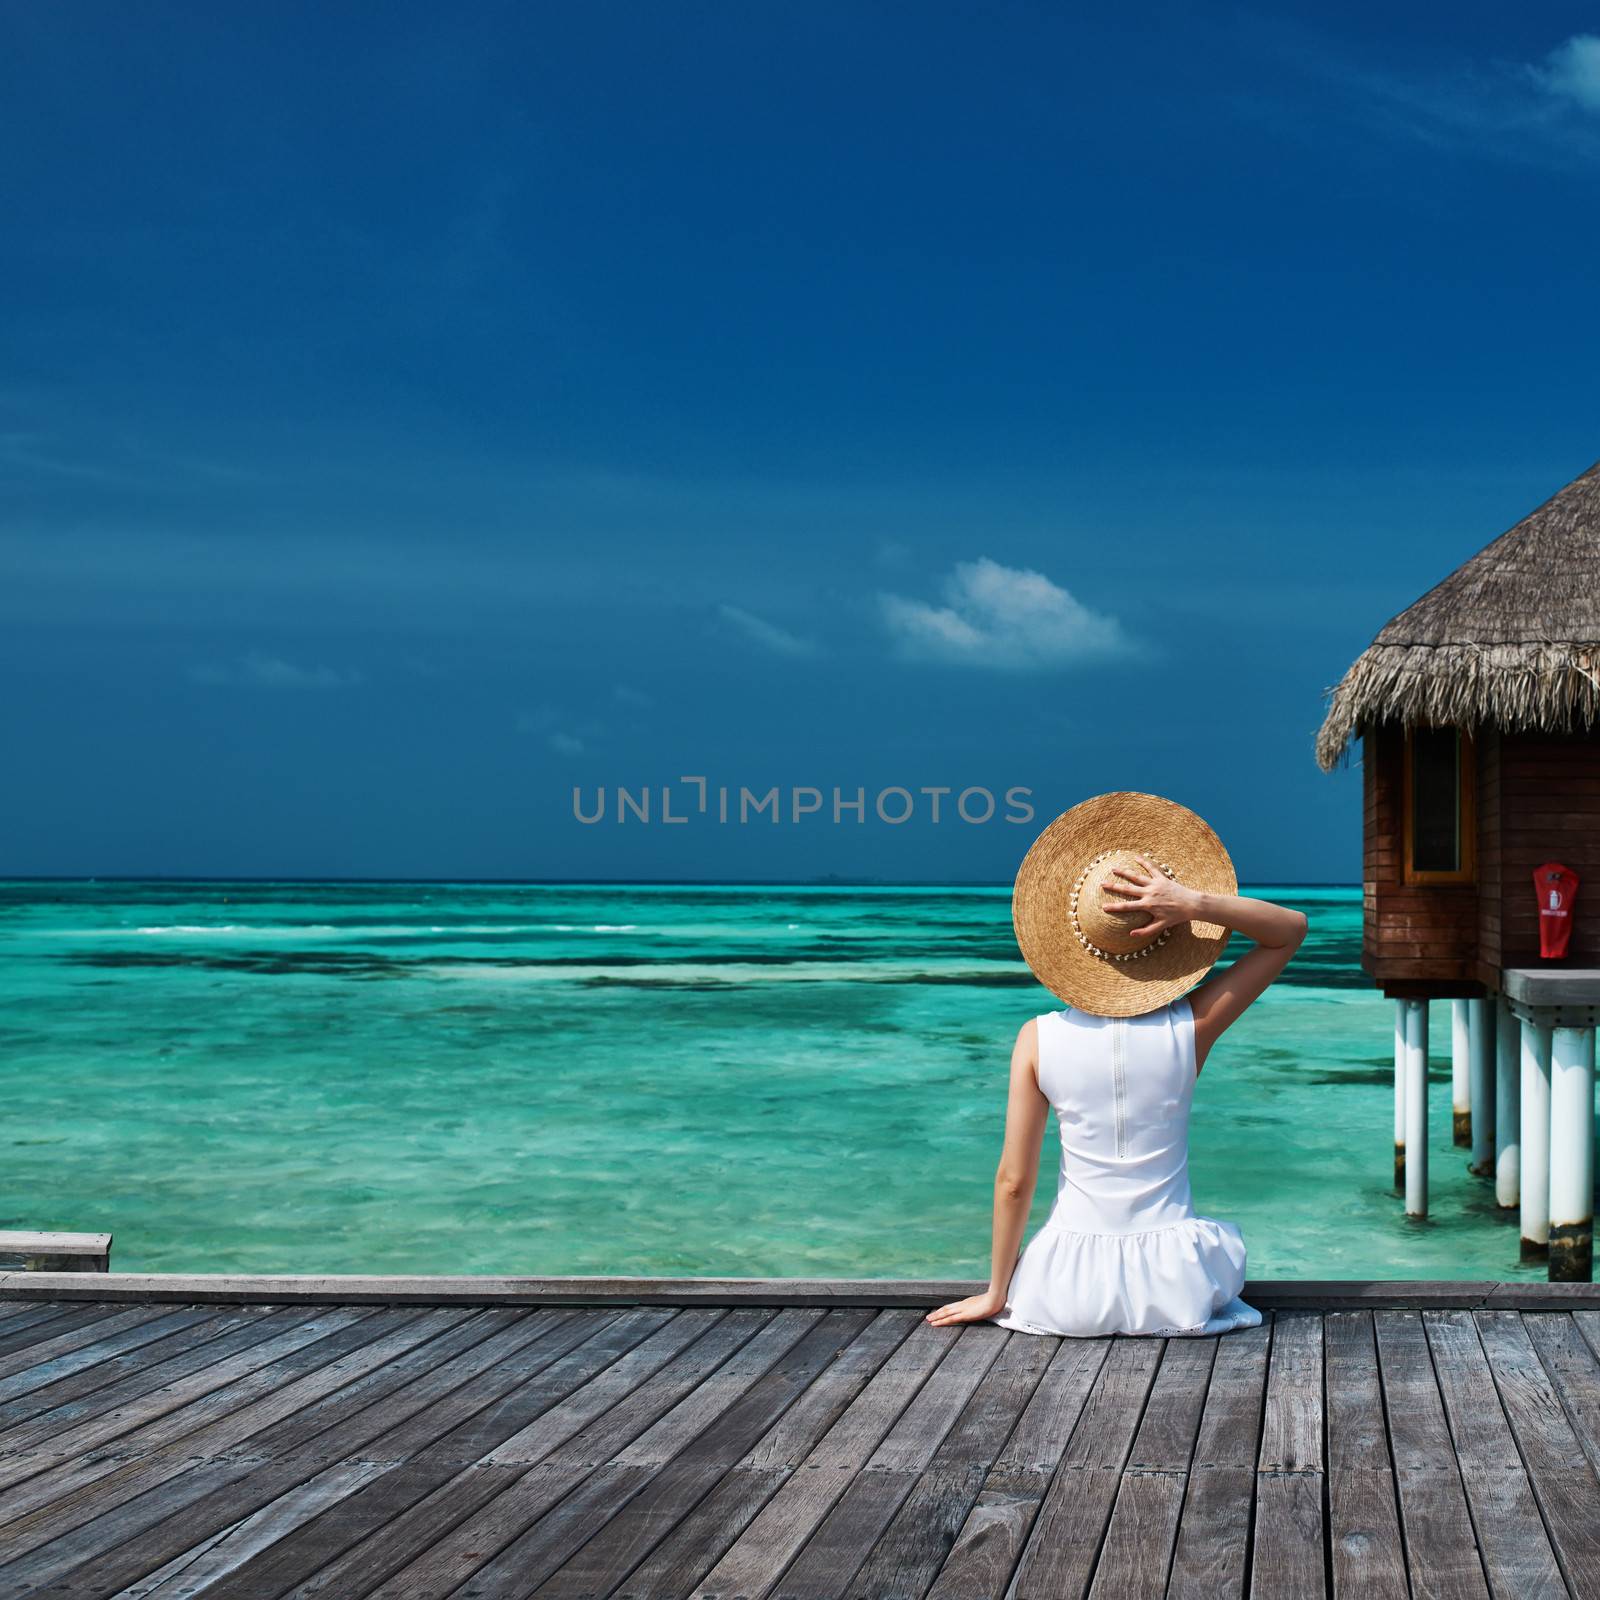 Woman on a beach jetty at Maldives by haveseen